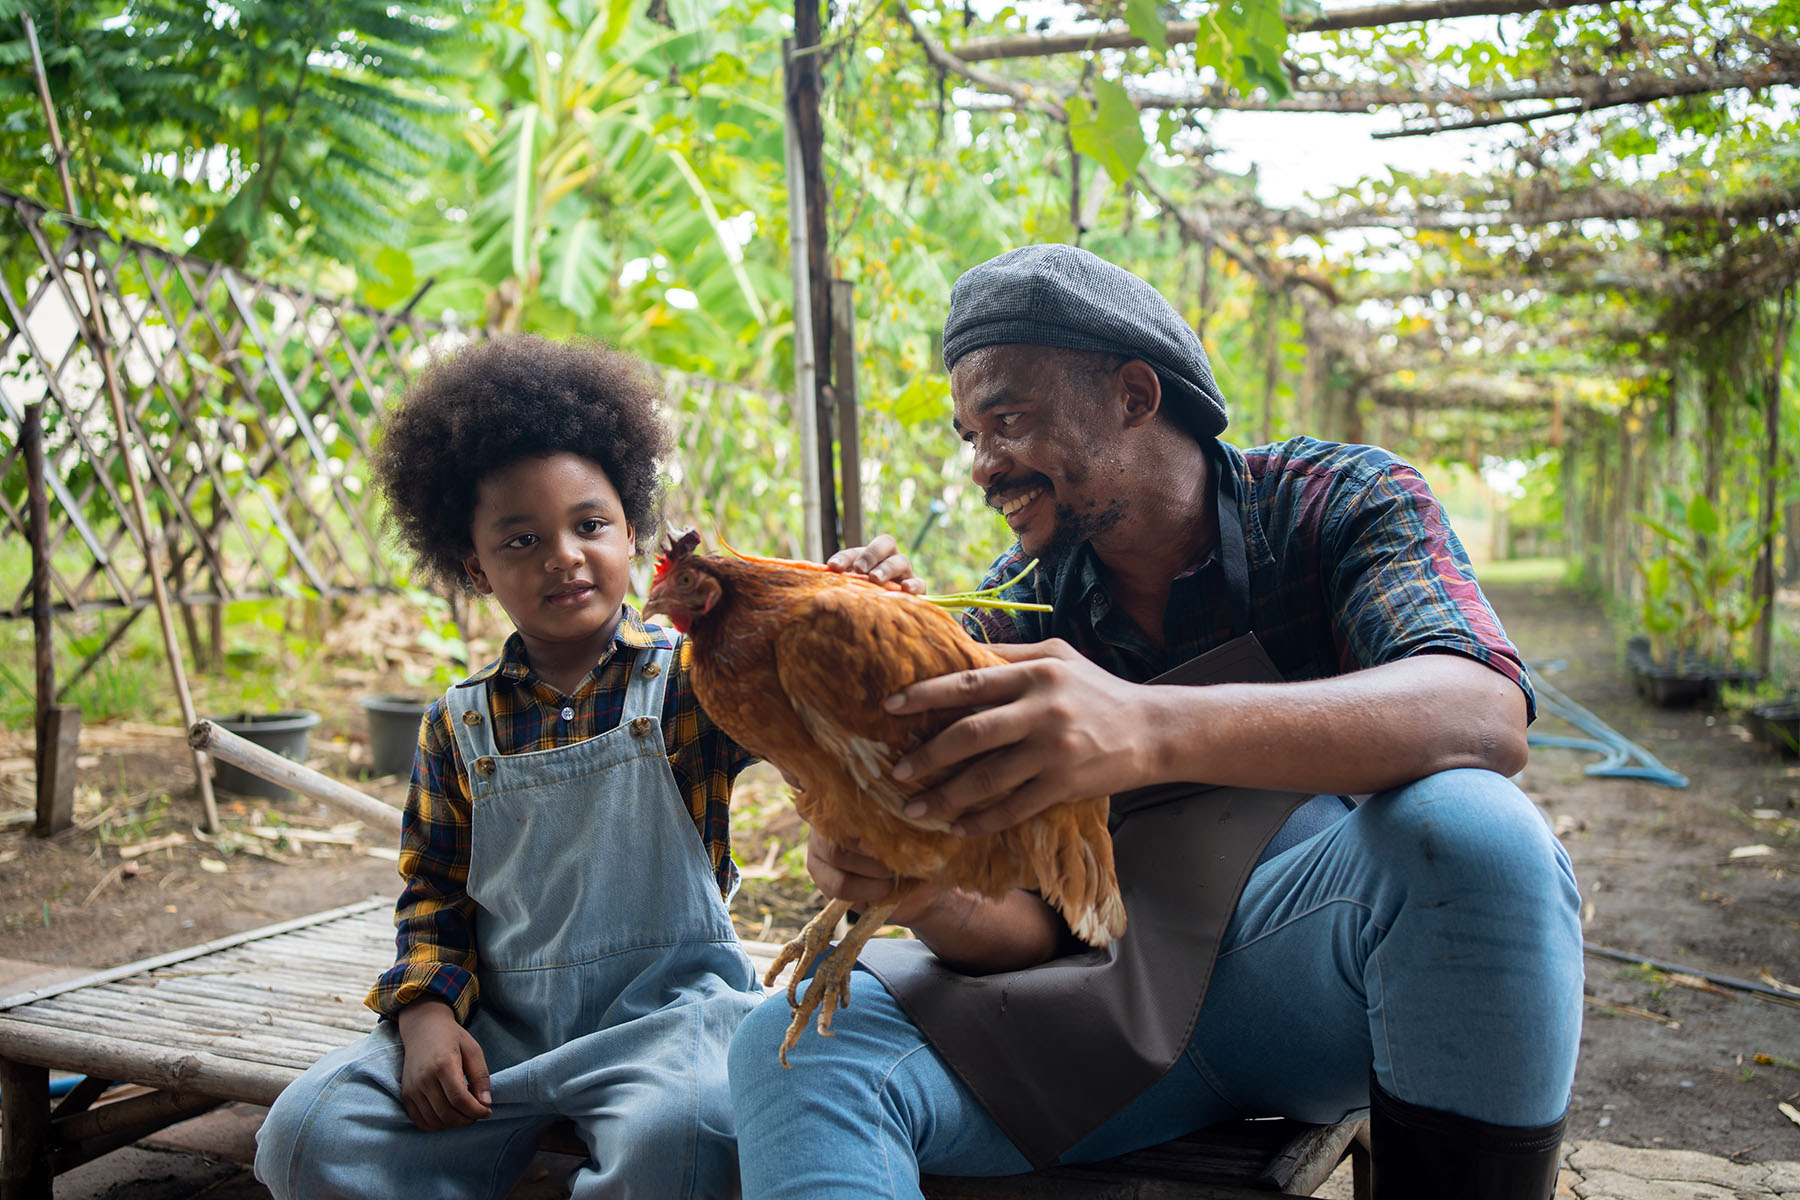 Self-employed farmer is holding a chicken while smiling and looking at a child beside them, who is petting the animal.